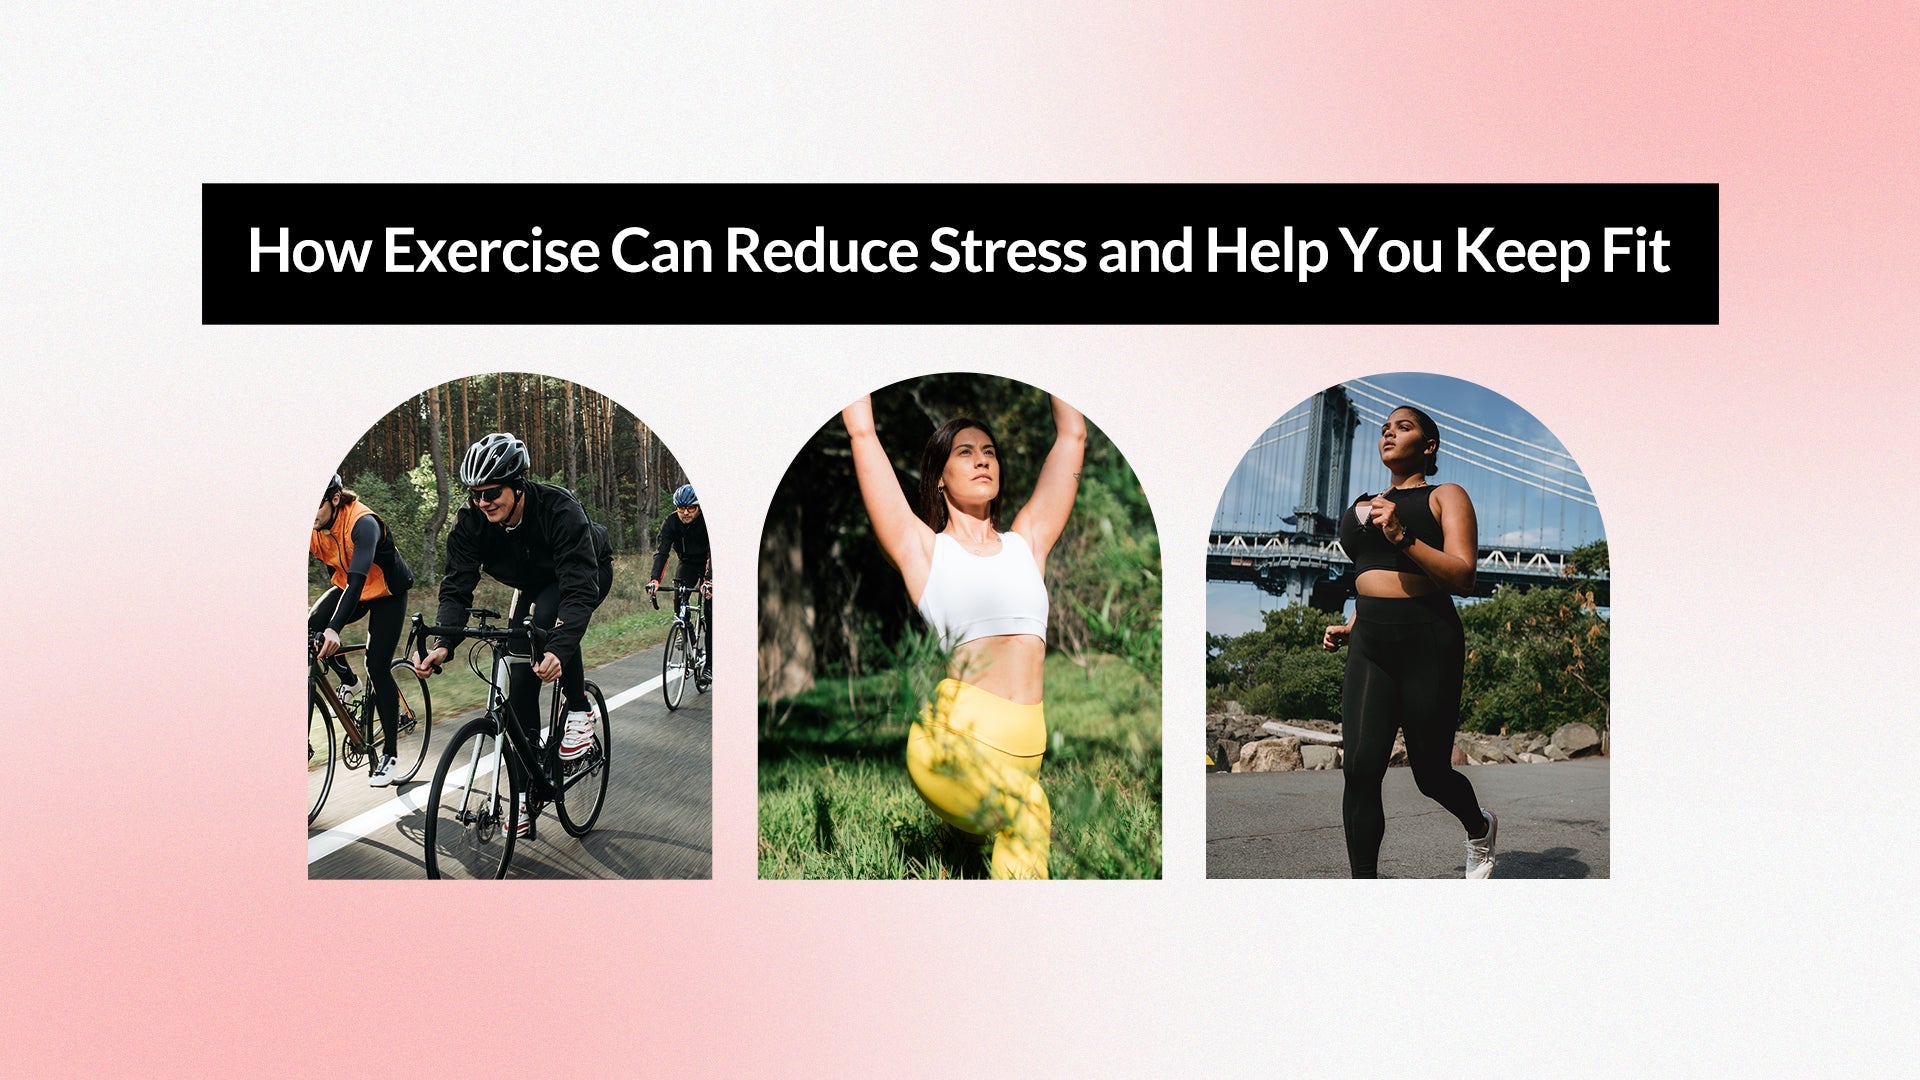 How Exercise Can Reduce Stress and Help You Keep Fit